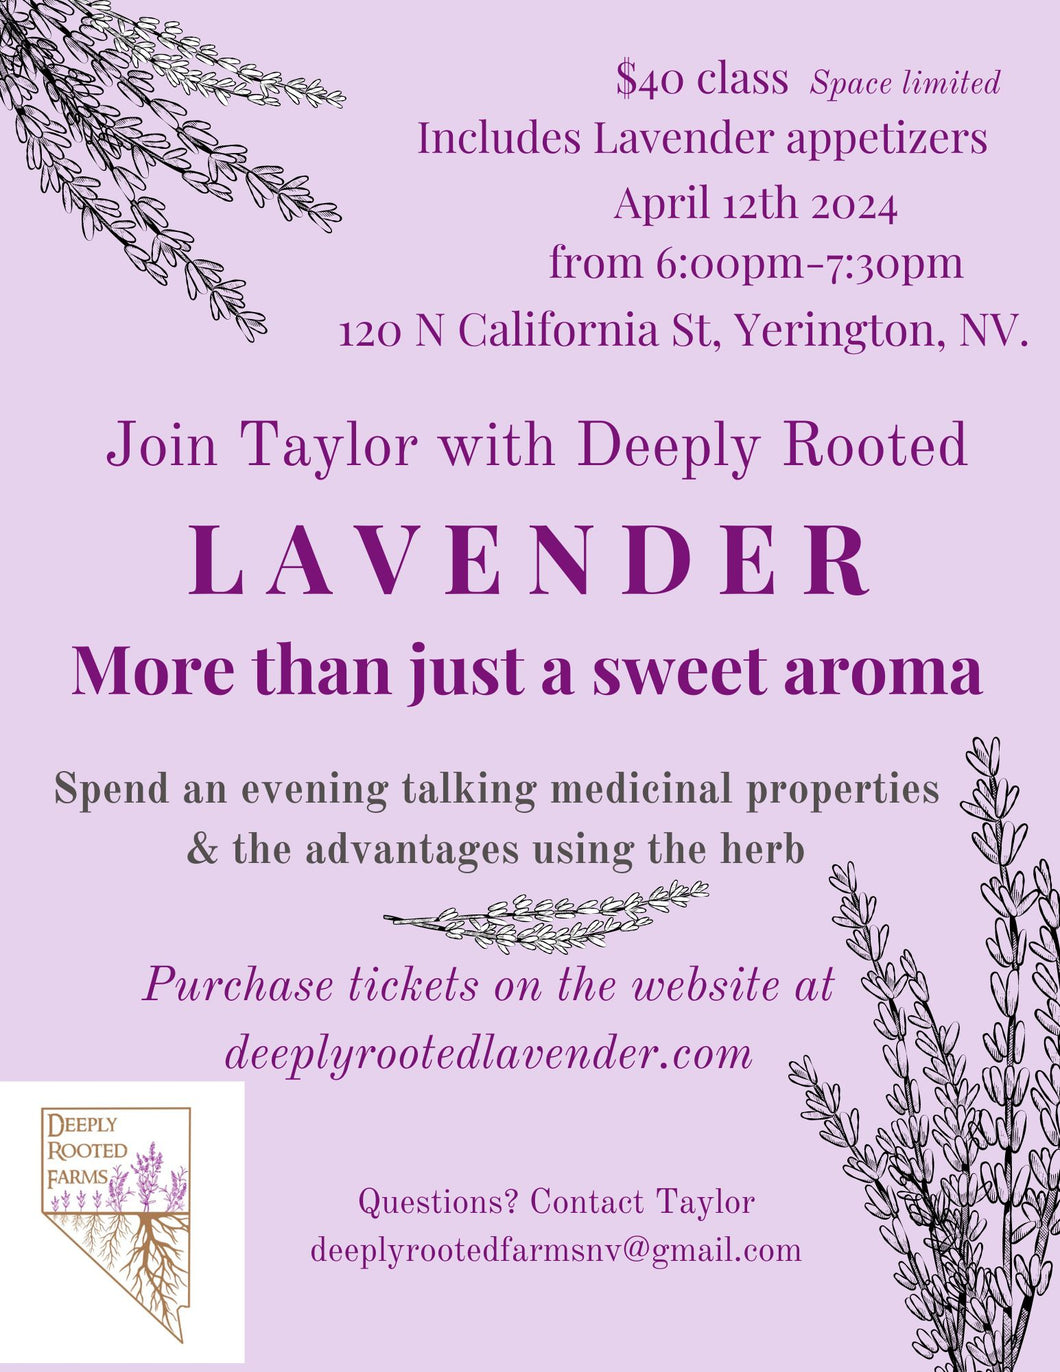 Lavender- More than a sweet aroma April 12th 2024 class